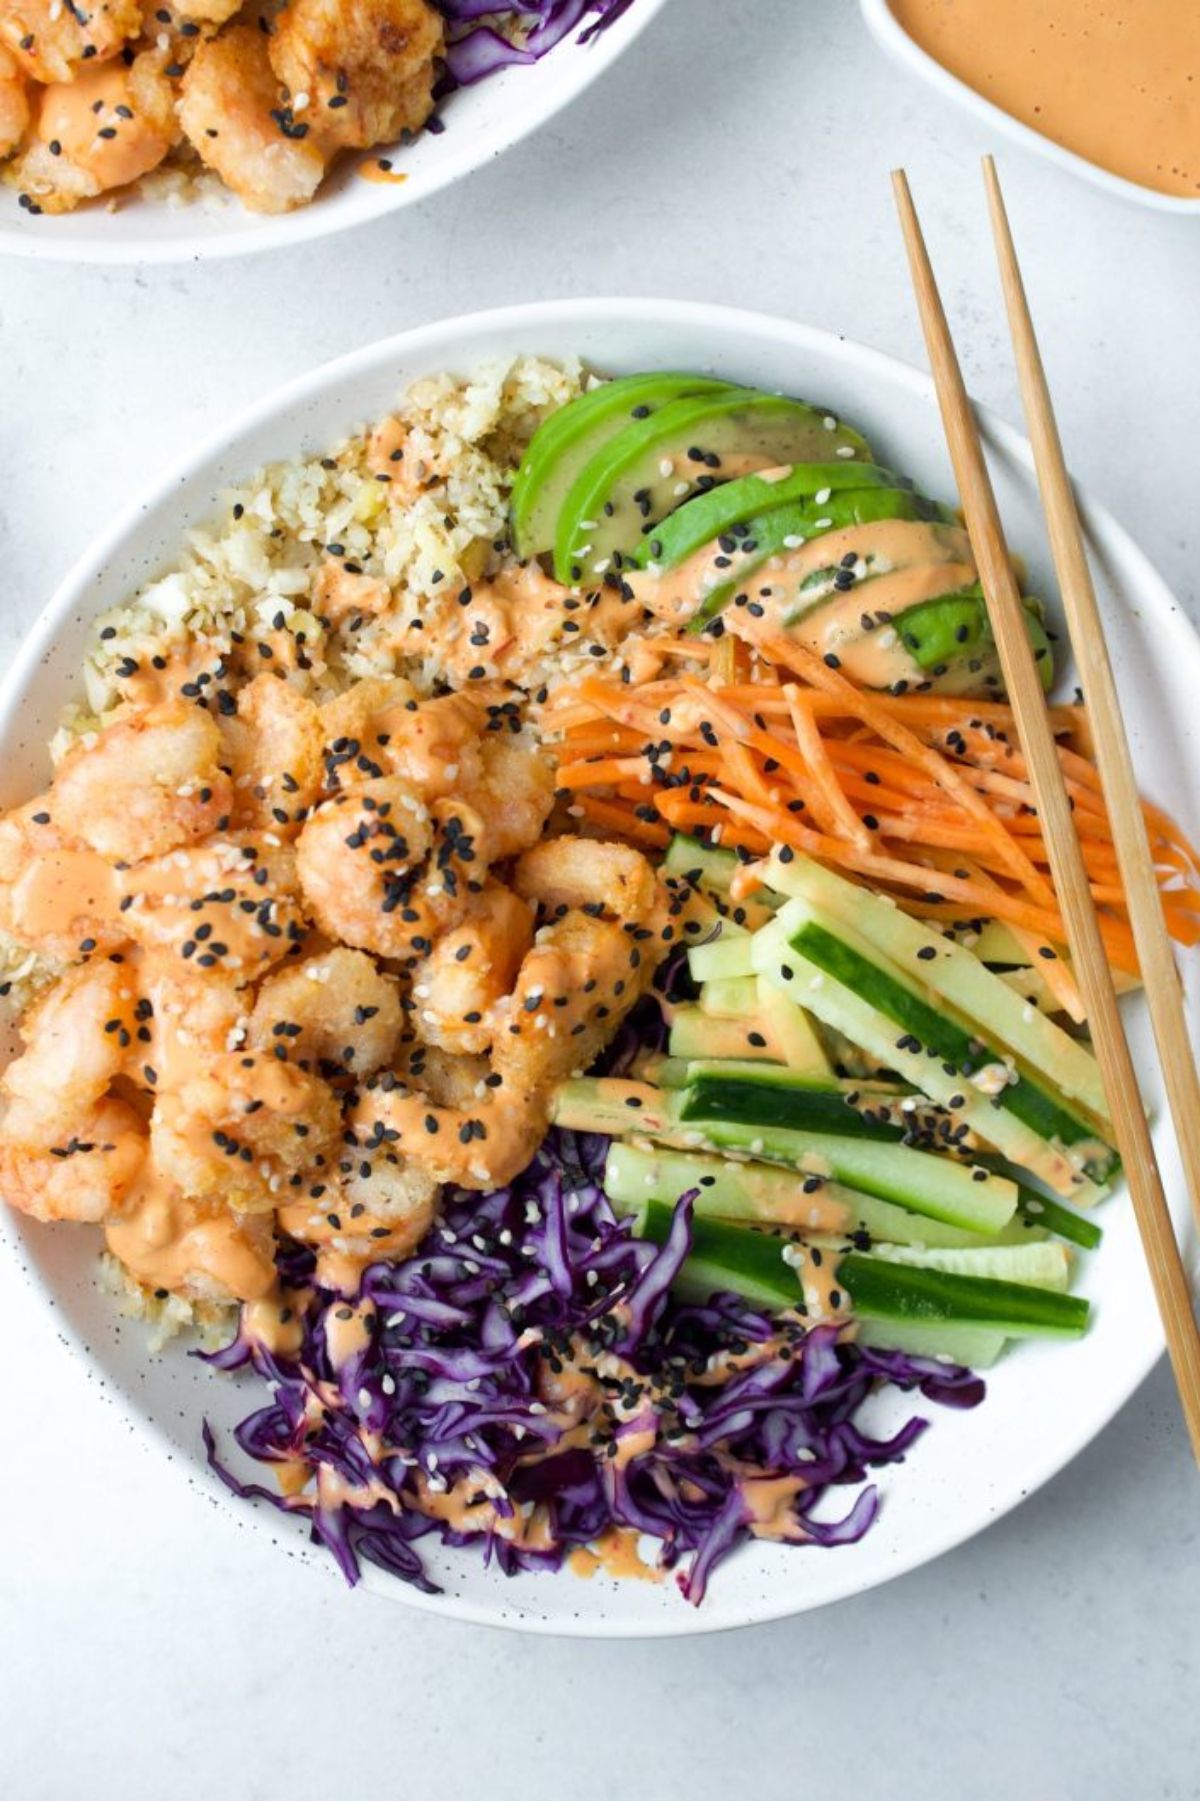 a white bowl of shrimp, sliced red cabbage, matchstick cucumbers and carrots, and sliced green apple. Chopsticks are resting on the side of the plate